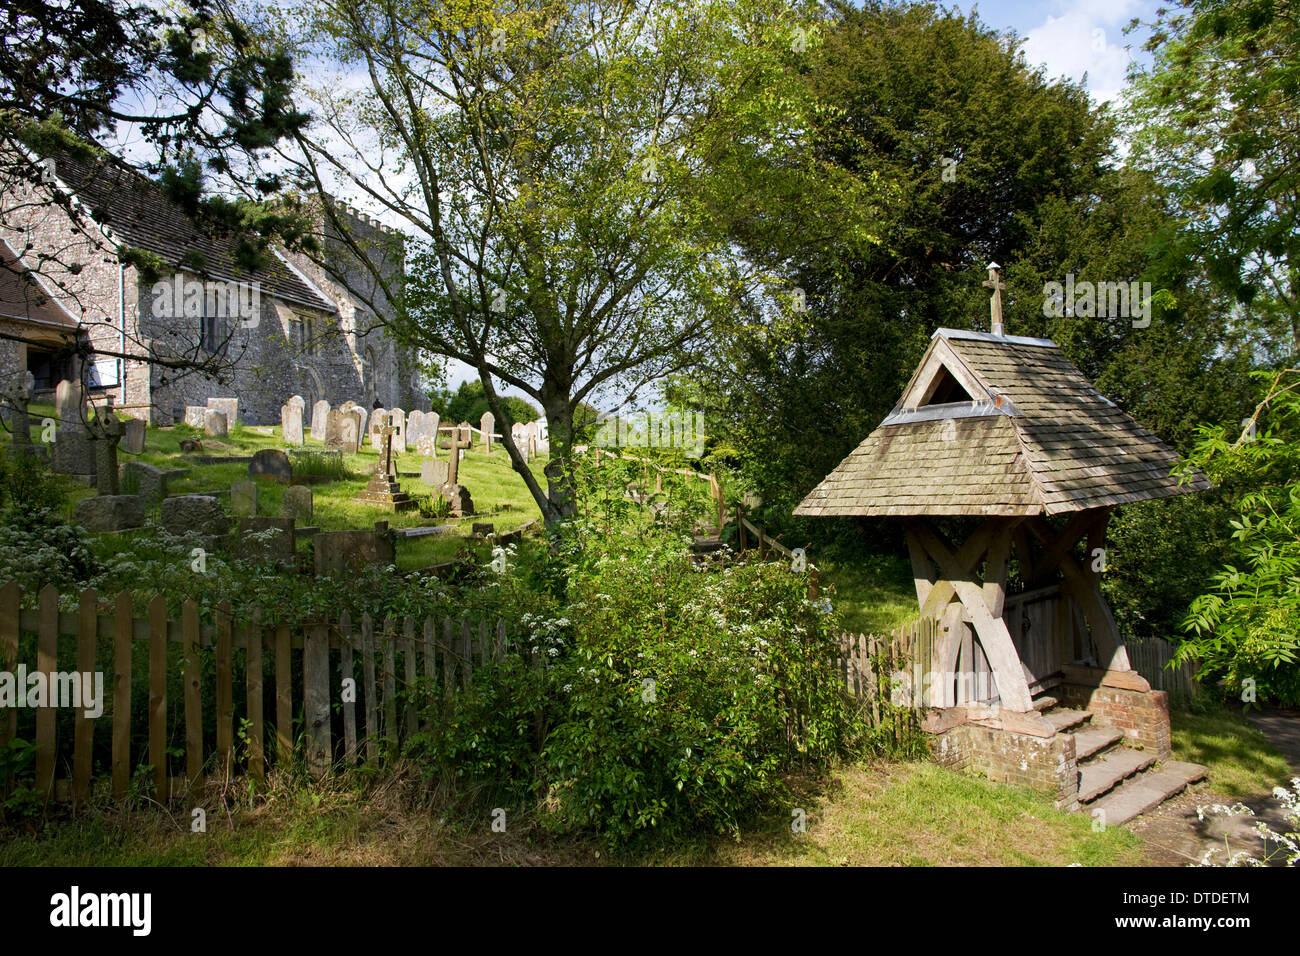 St Nicholas Church (One of oldest Norman churches in Sussex) and lych gate, village of Bramber, West Sussex, England, UK. Stock Photo